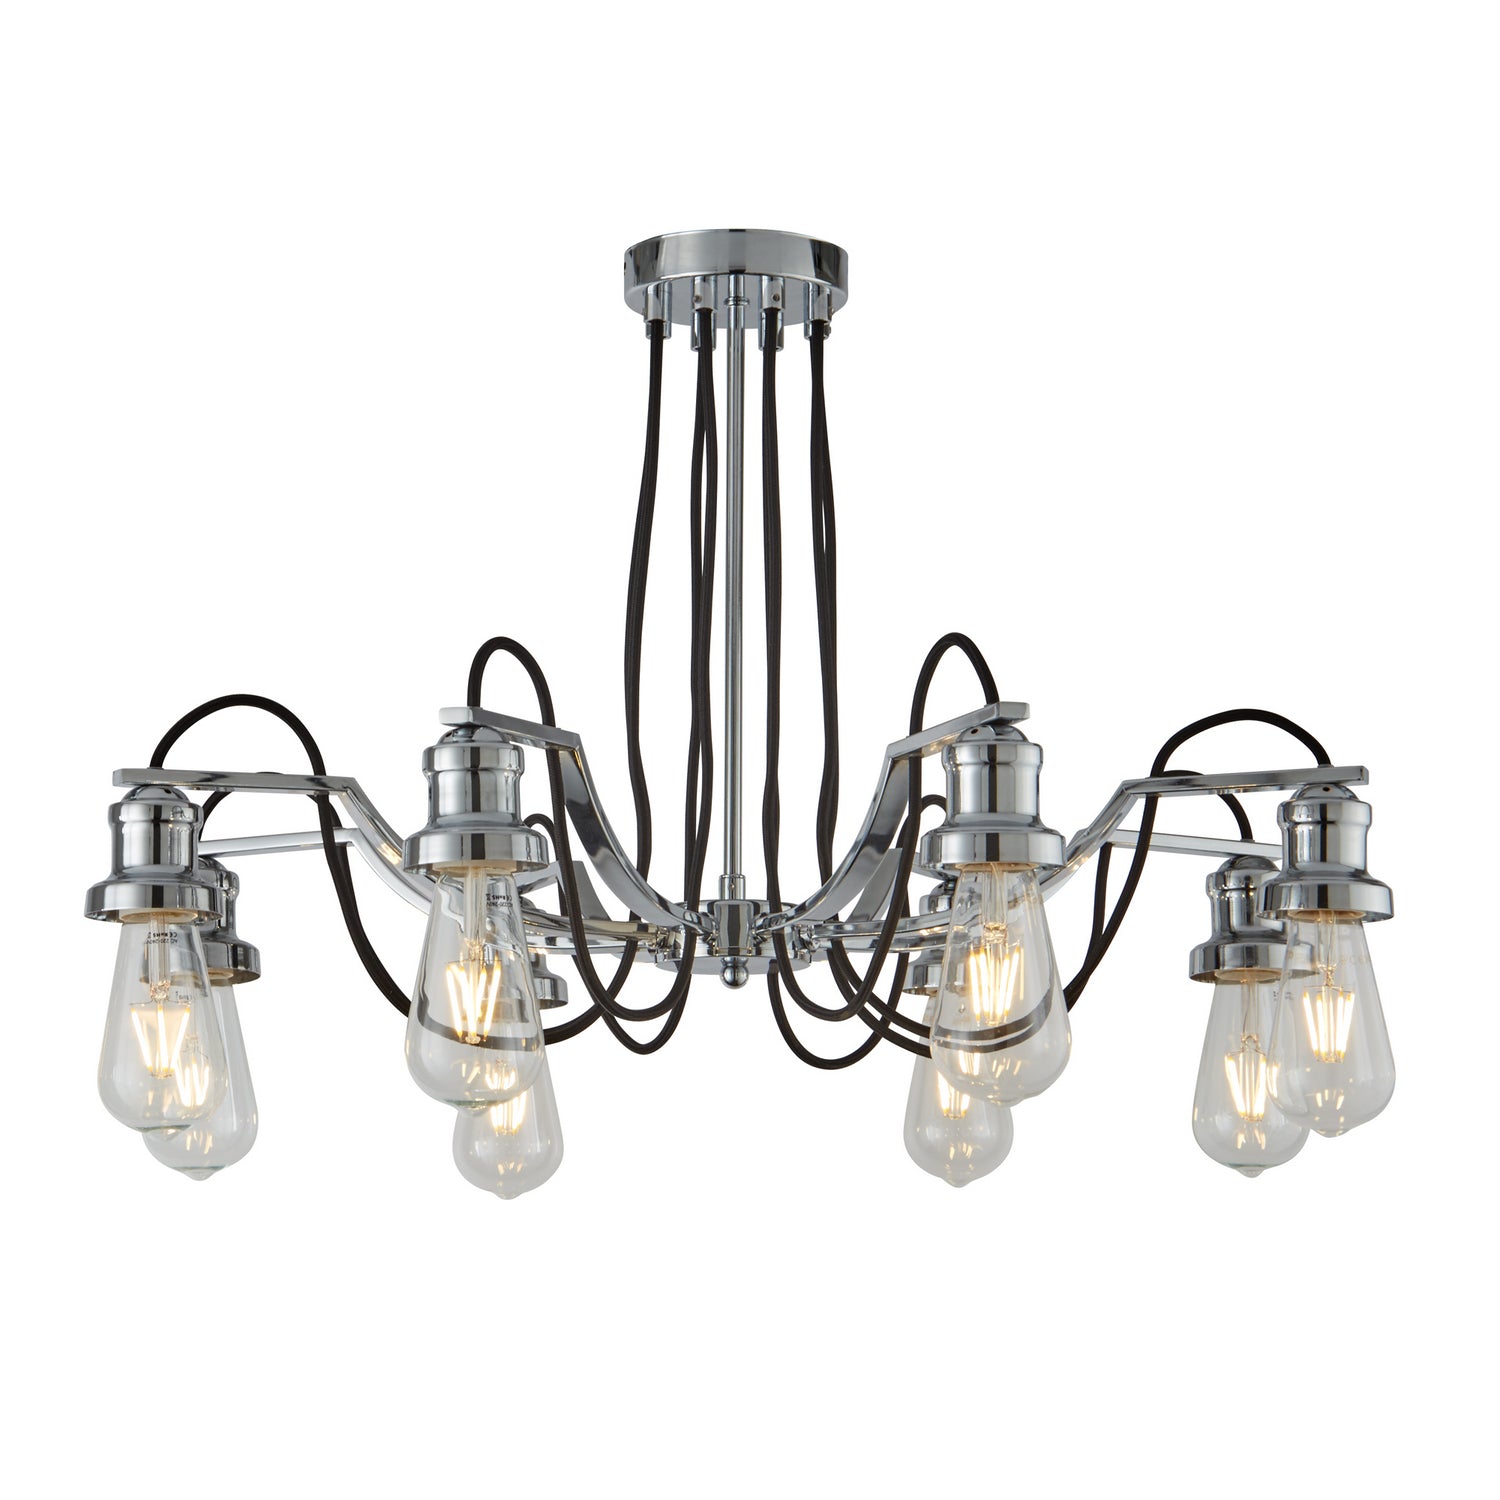 Olivia 8 Lights Black Braided Fabric Cable Chrome Ceiling Chandelier